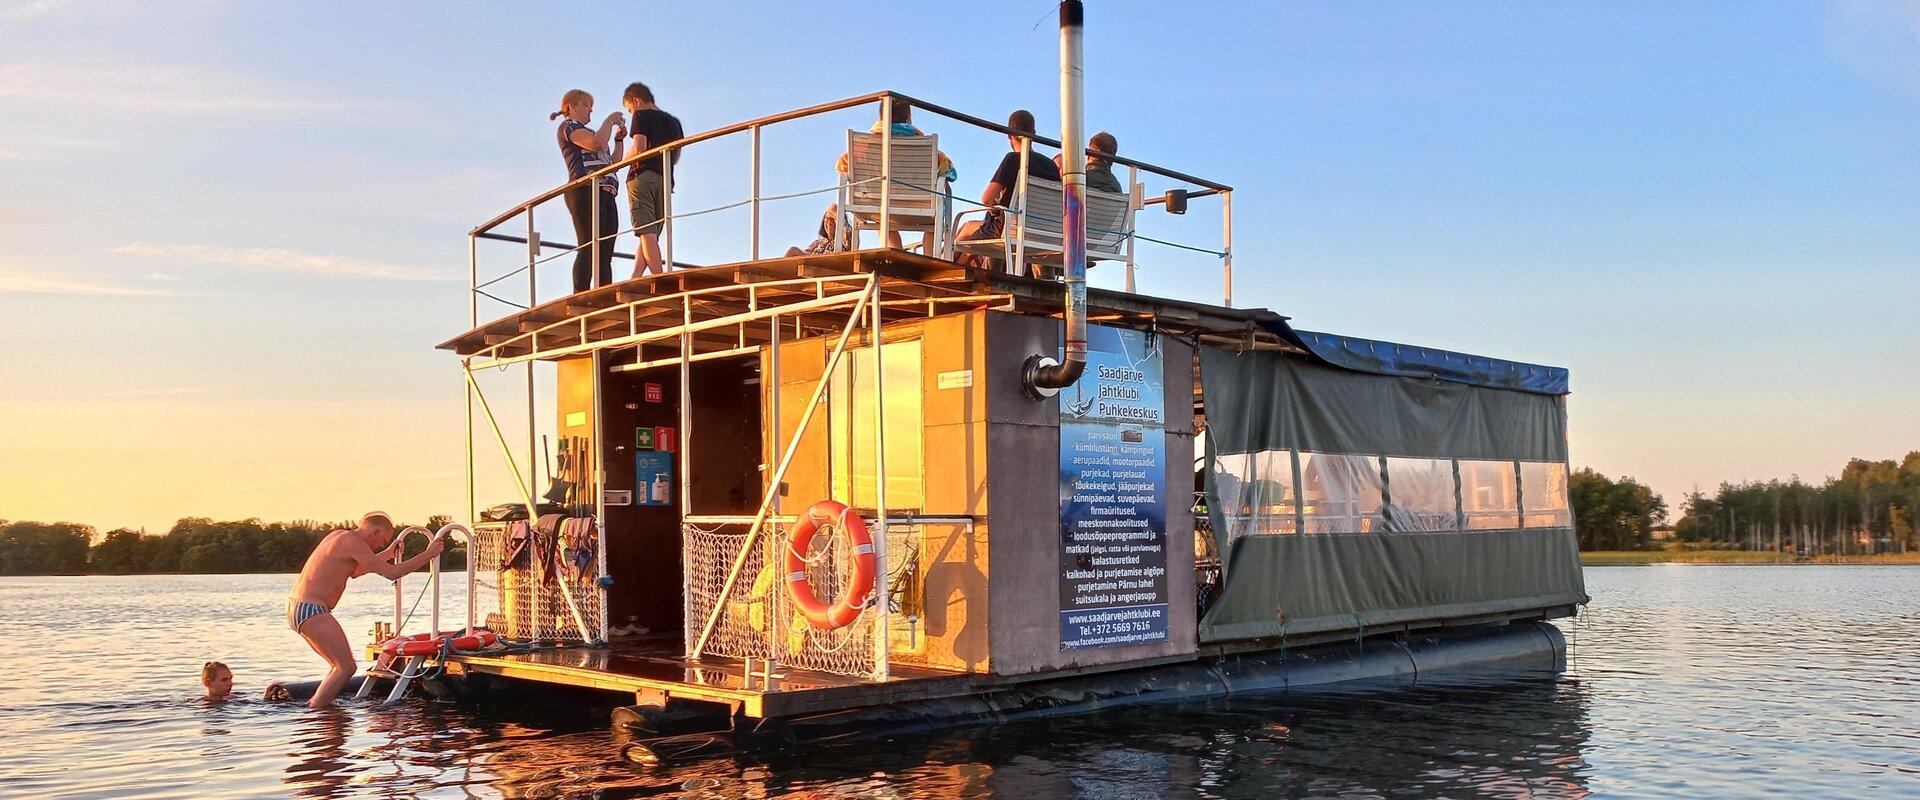 The raft sauna can accommodate up to 30 passengers. There are tables, benches and a toilet on the raft. The sun deck offers a beautiful view of Voorem